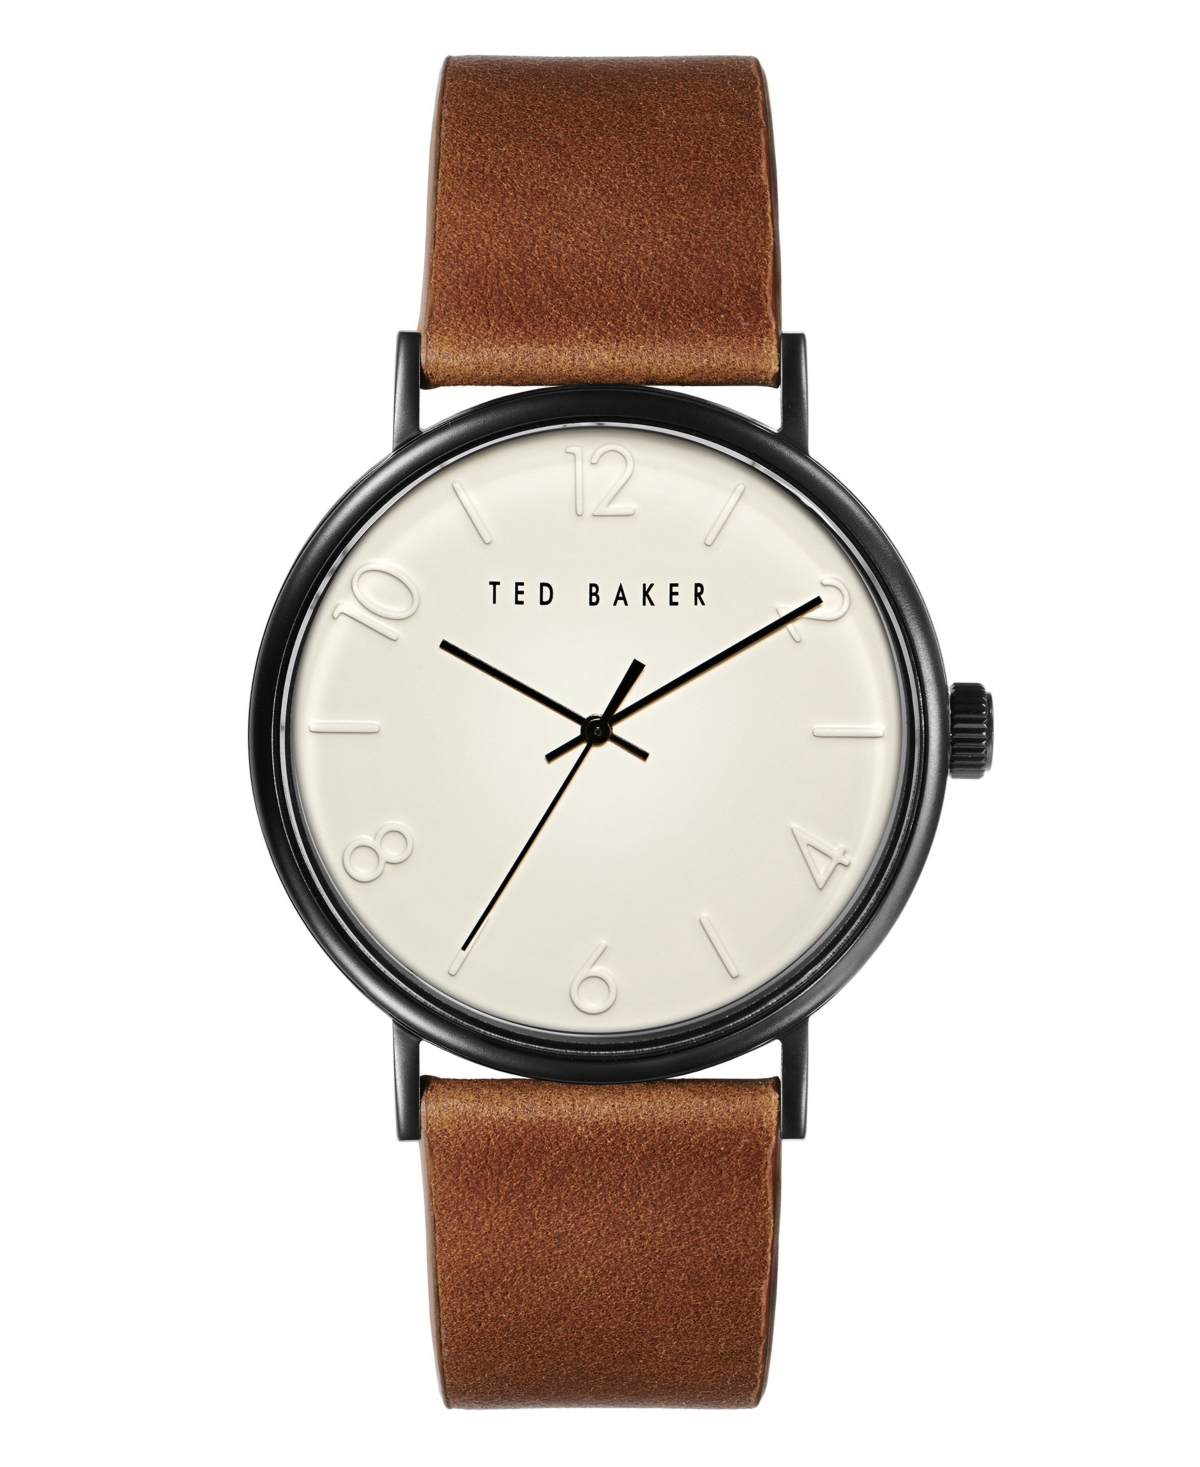 TED BAKER MEN'S PHYLIPA TAN LEATHER STRAP WATCH 43MM